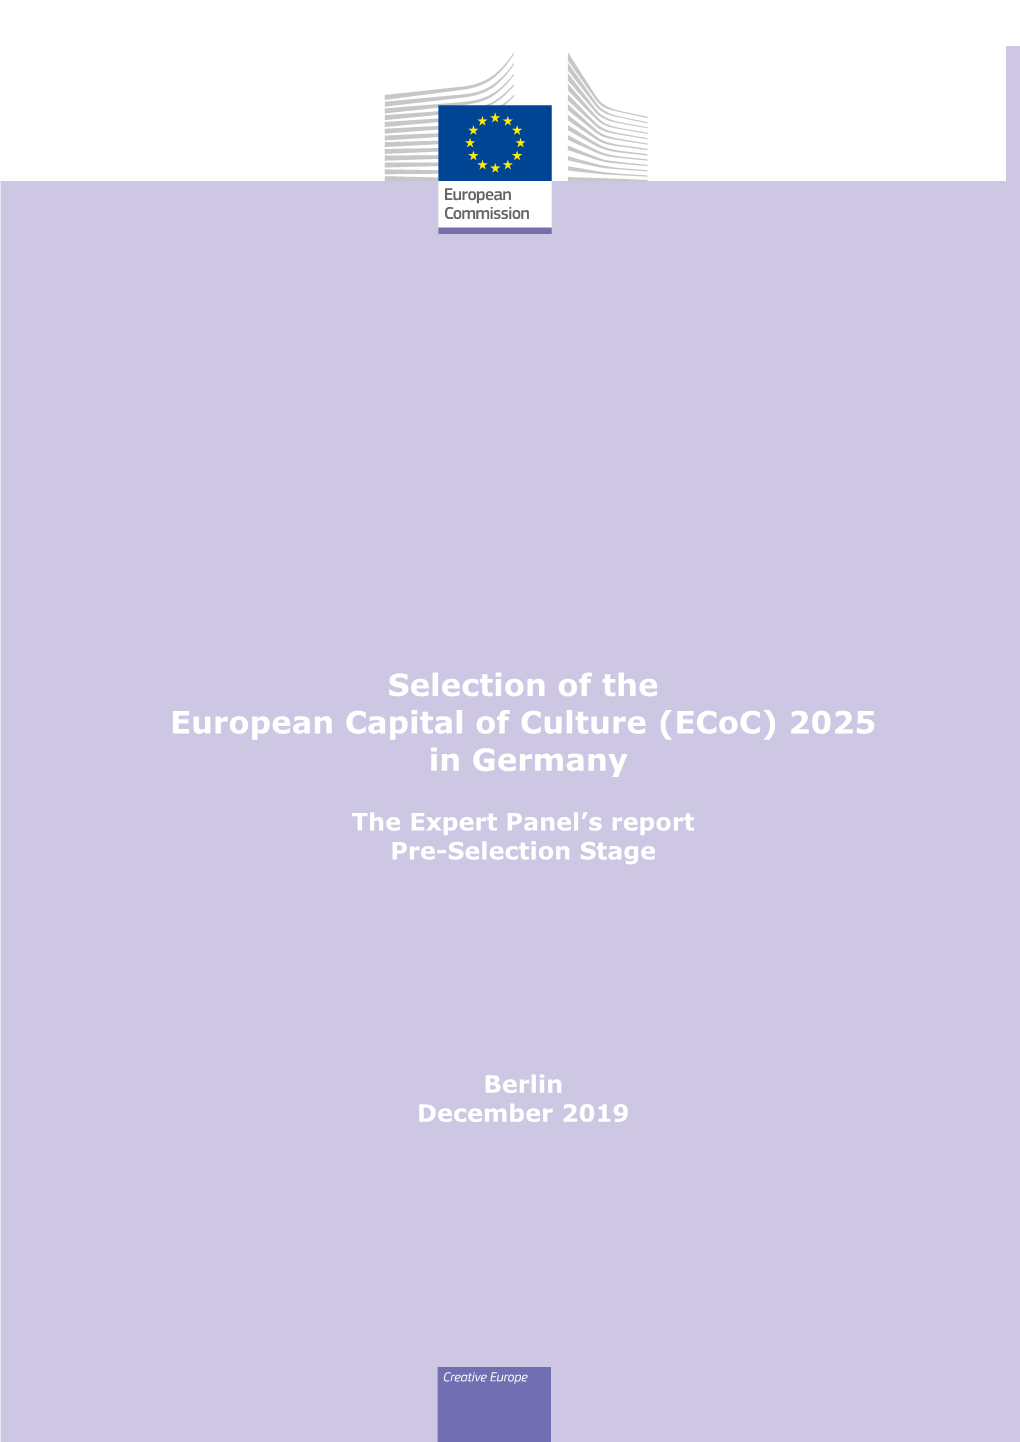 Selection of the European Capital of Culture (Ecoc) 2025 in Germany